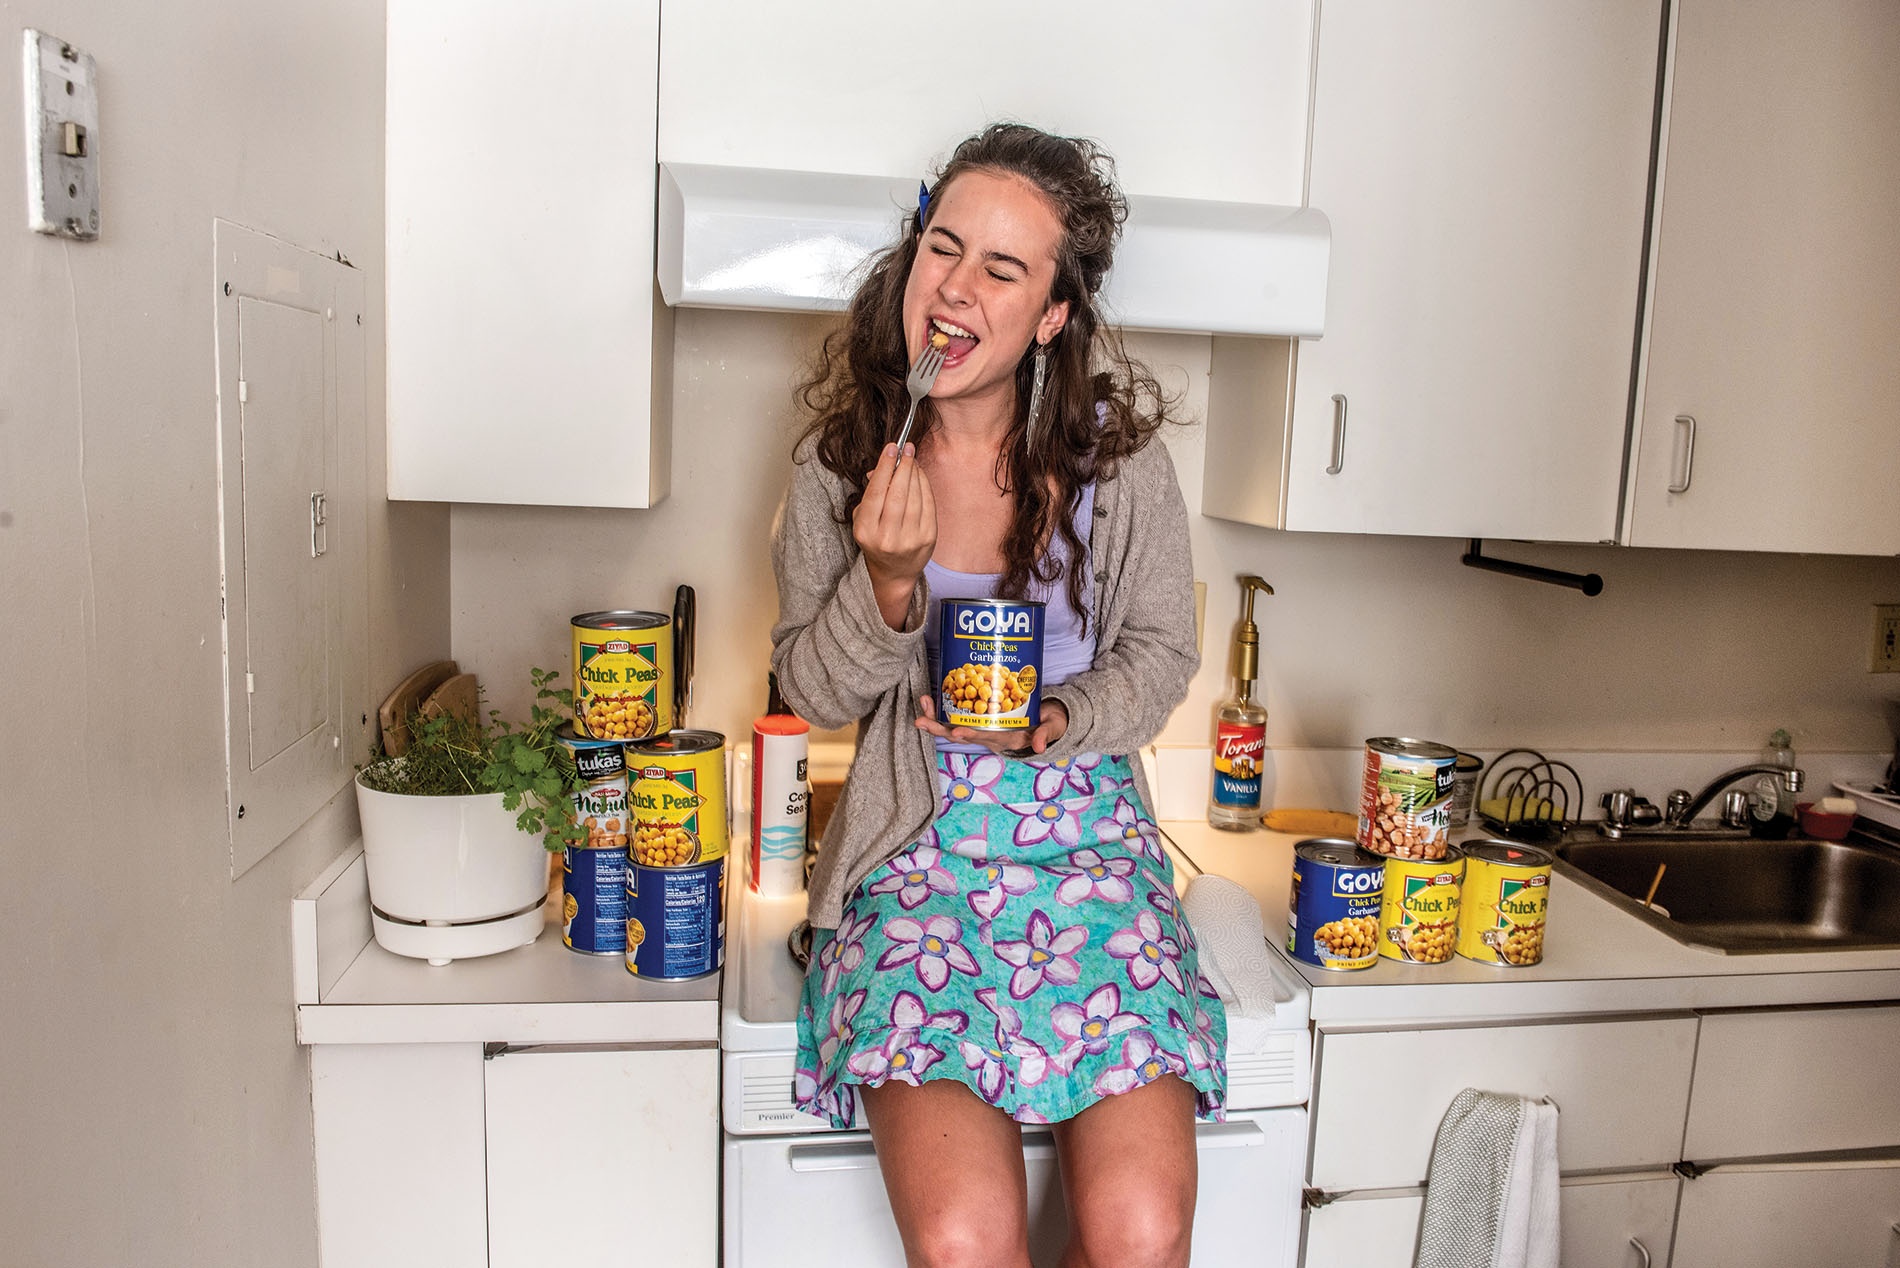 Image of Marielle Buxbaum sitting on the counter in her kitchen with cans of garbanzo beans.